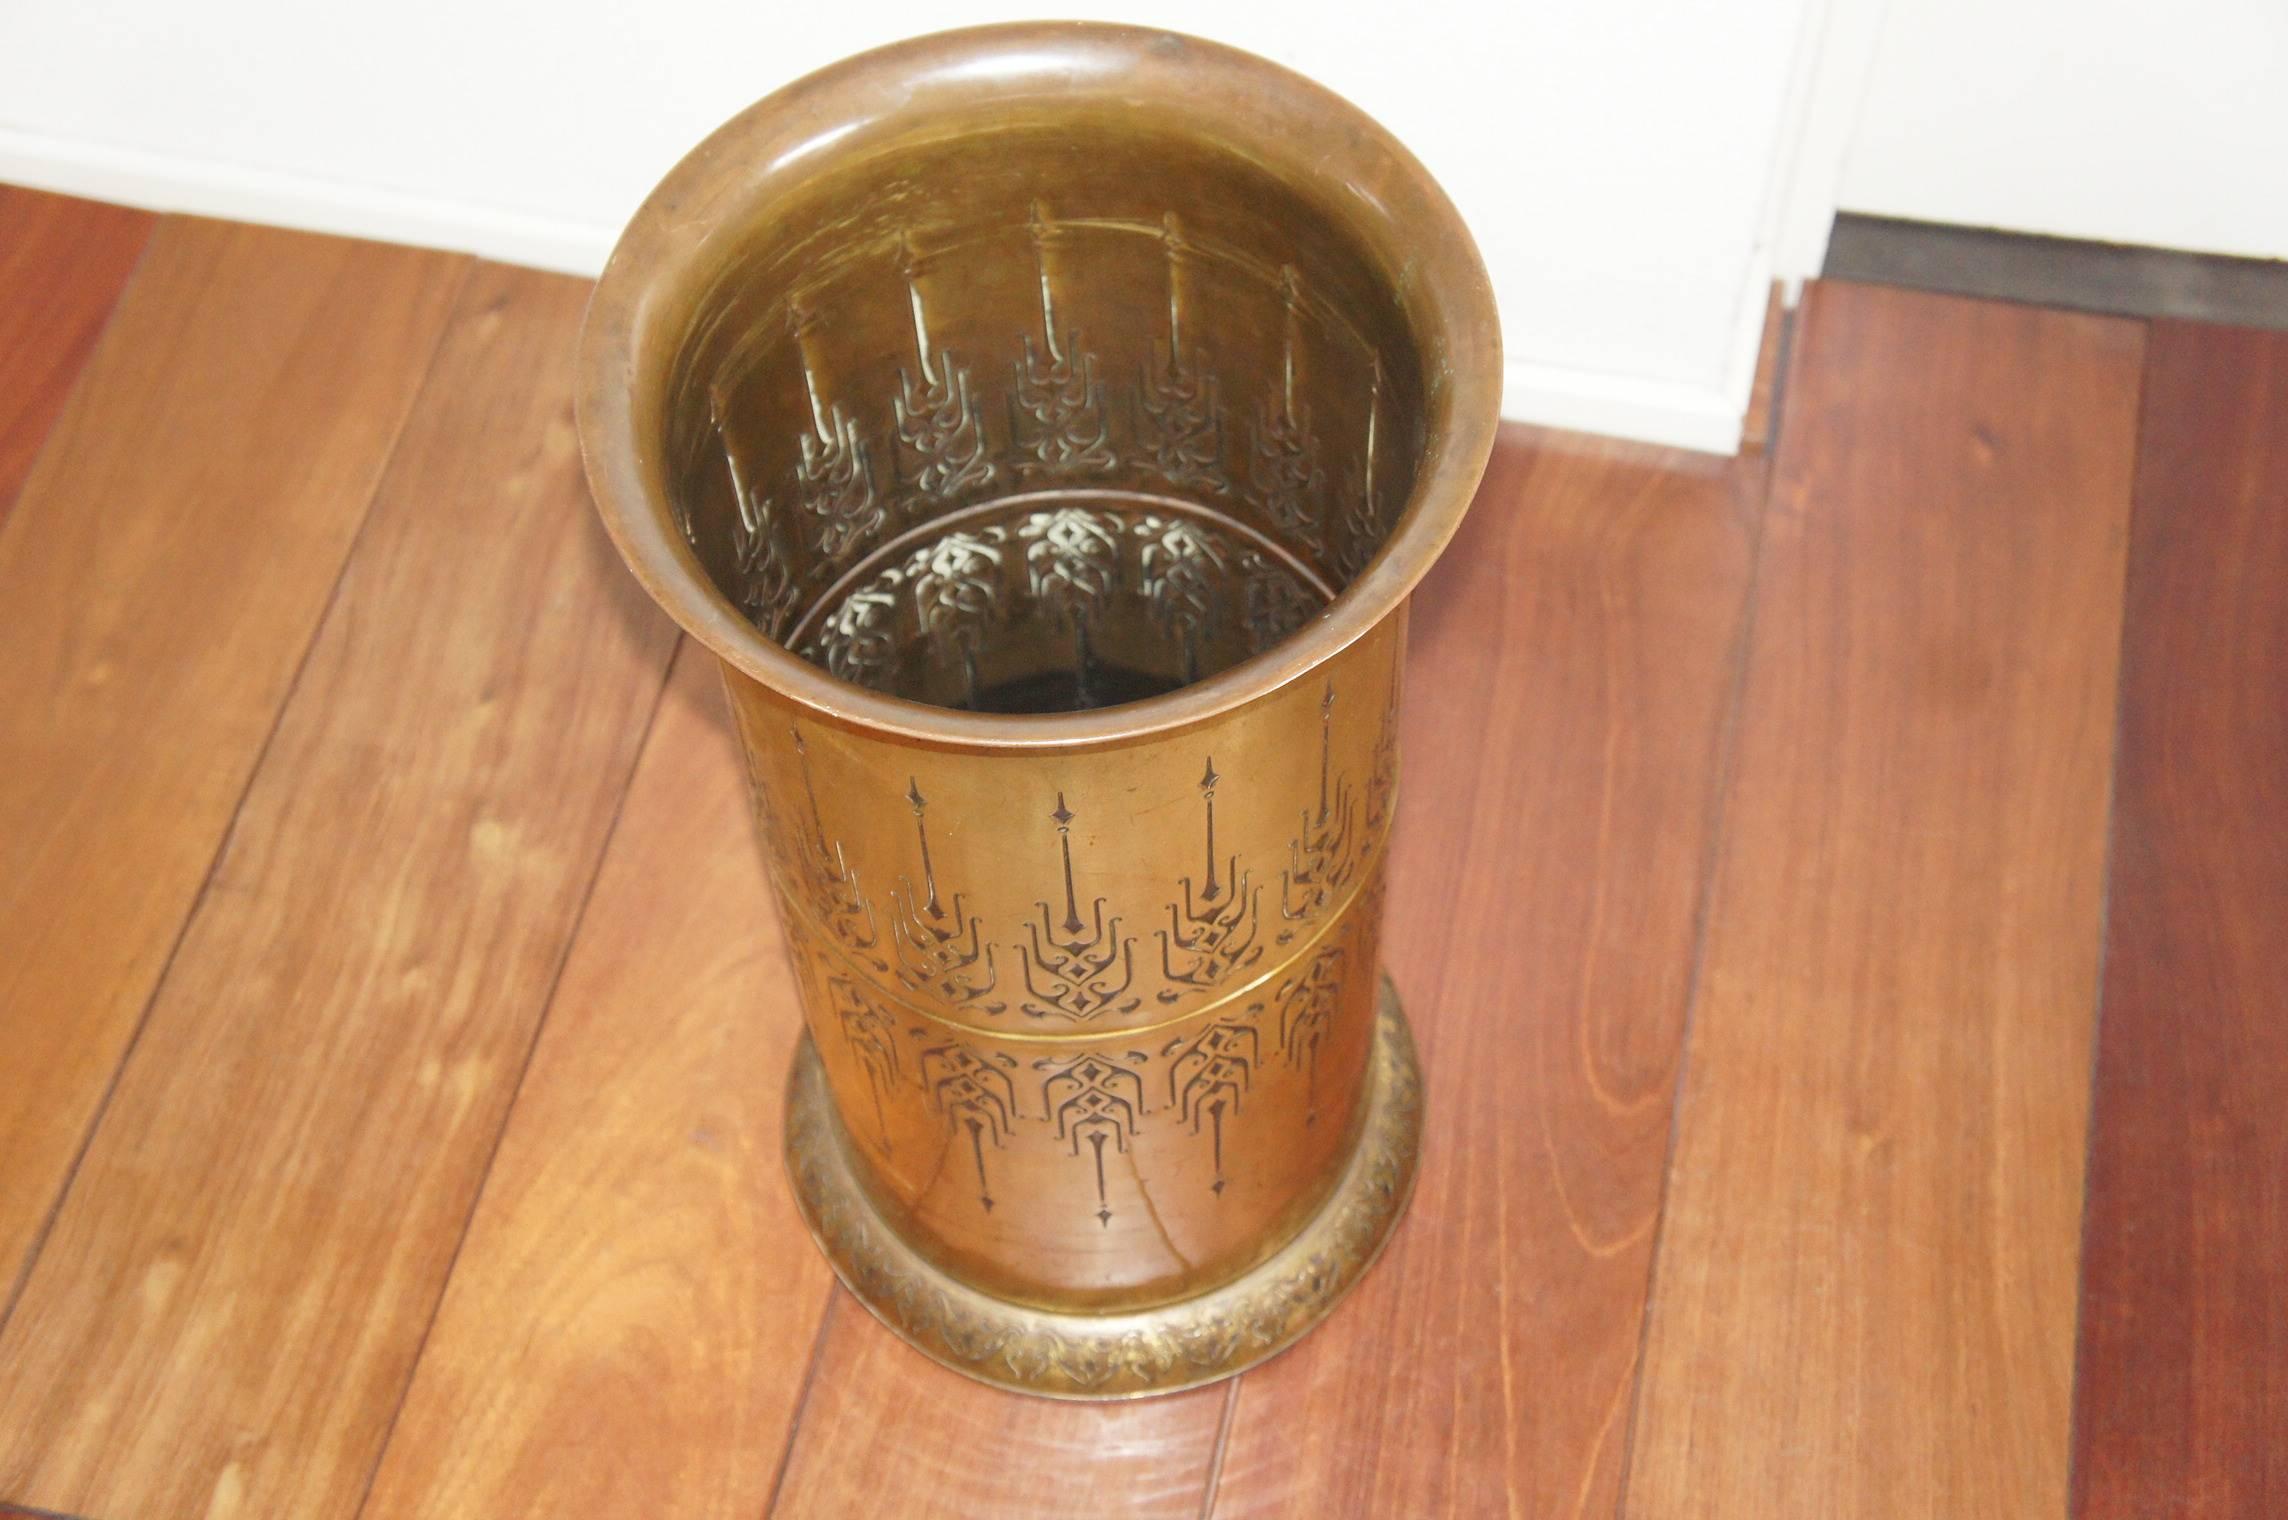 Early 1900s embossed Art Nouveau umbrella stand.

This beautifully embossed brass umbrella stand will upgrade any entrance or hallway. This rare example is made and marked by Daalderop of Tiel (Holland). It comes with the original zinc liner and